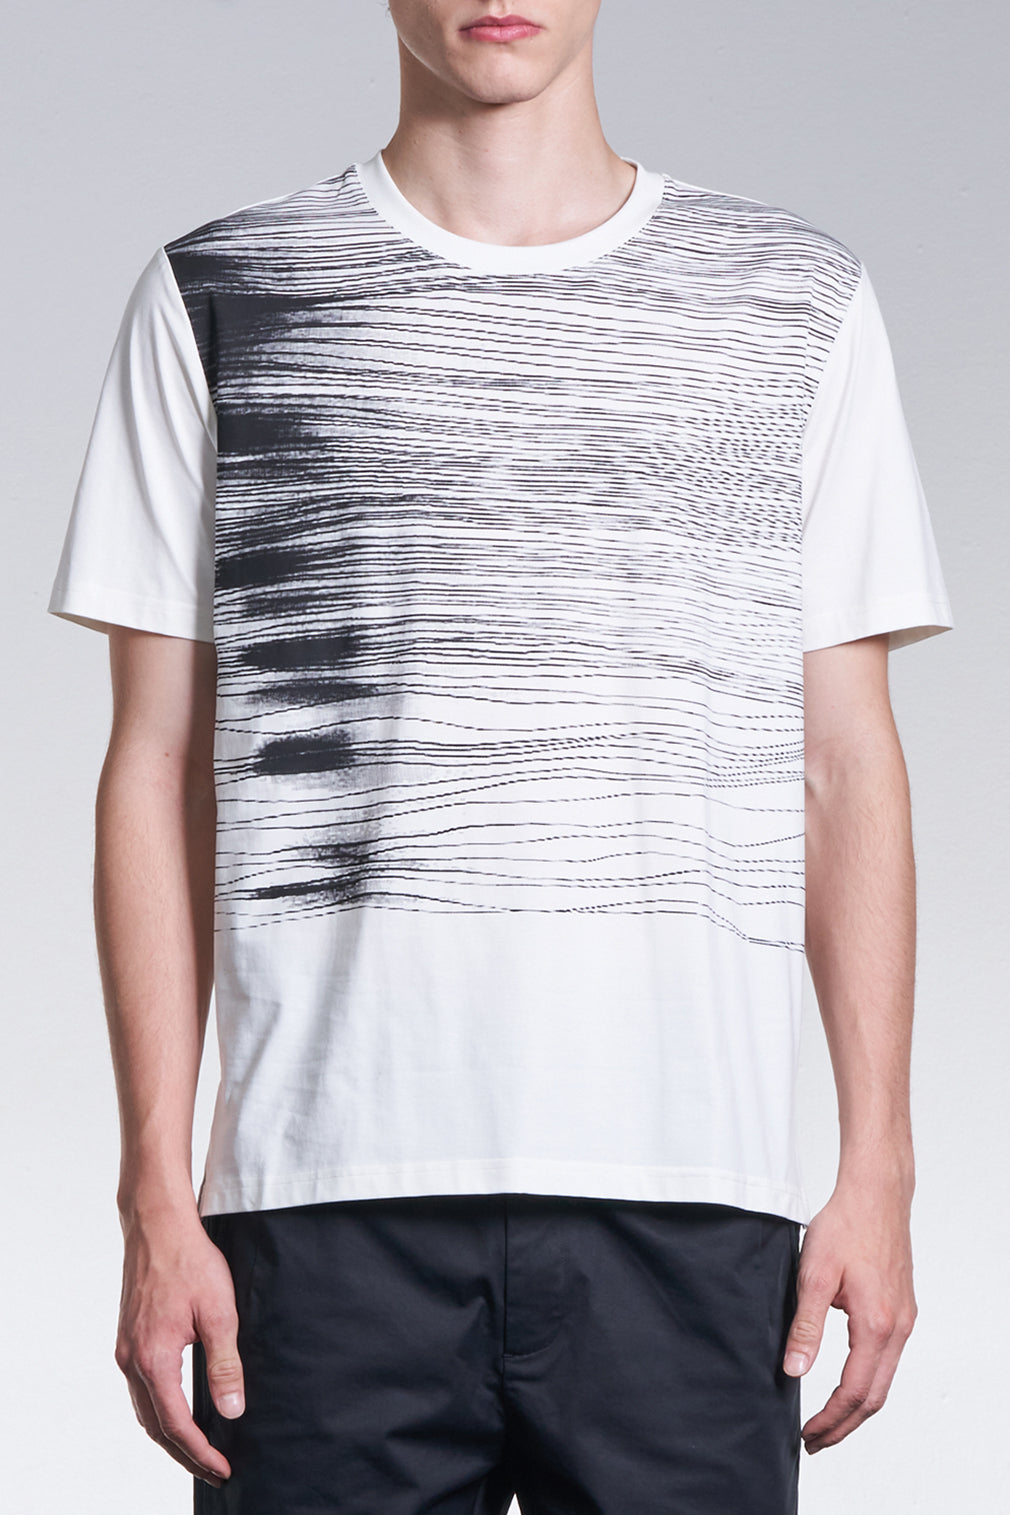 Tee With Shadow Pen Drawing